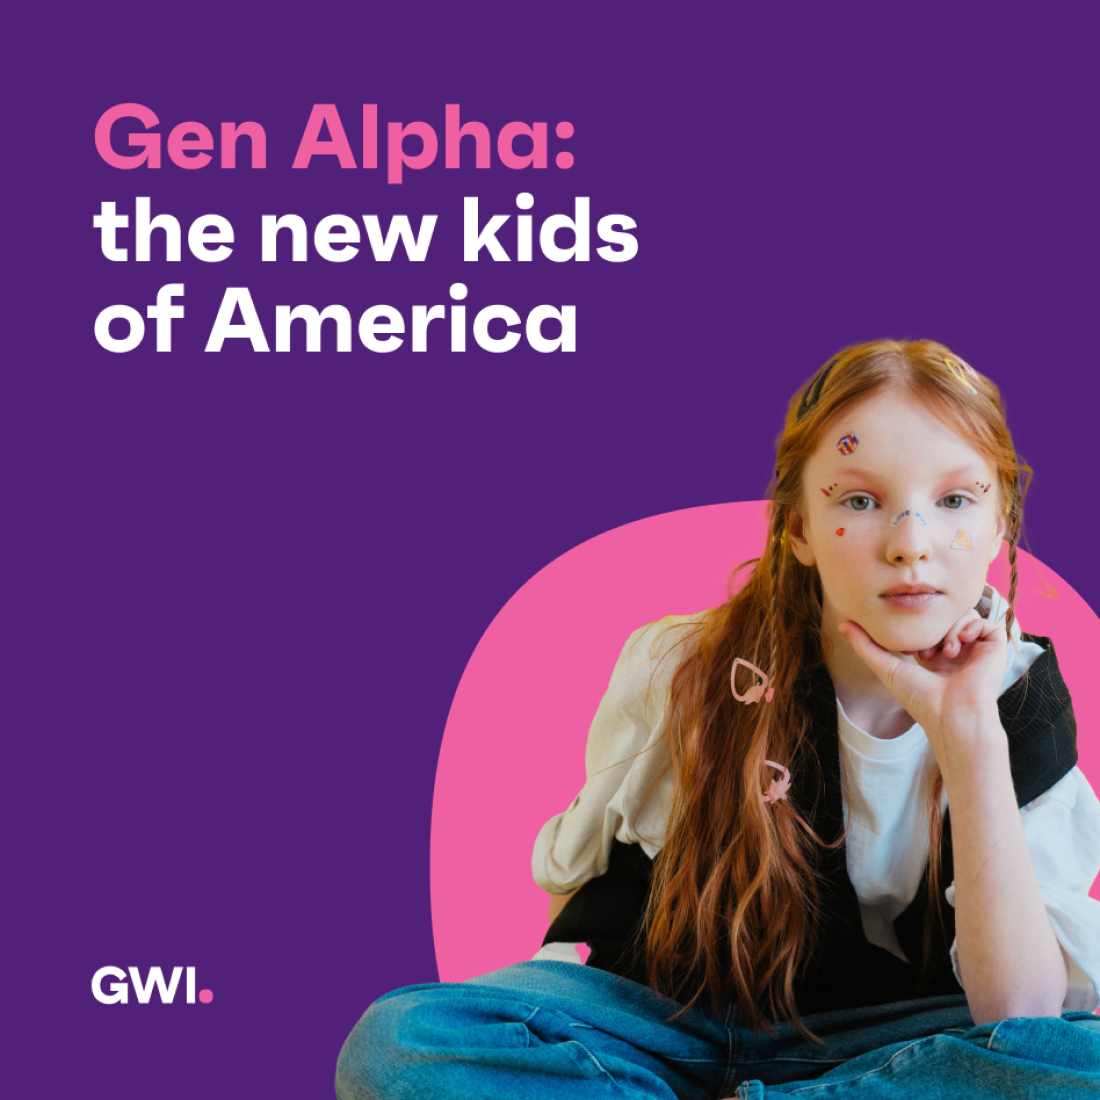 Generation Alpha: the new kids of America